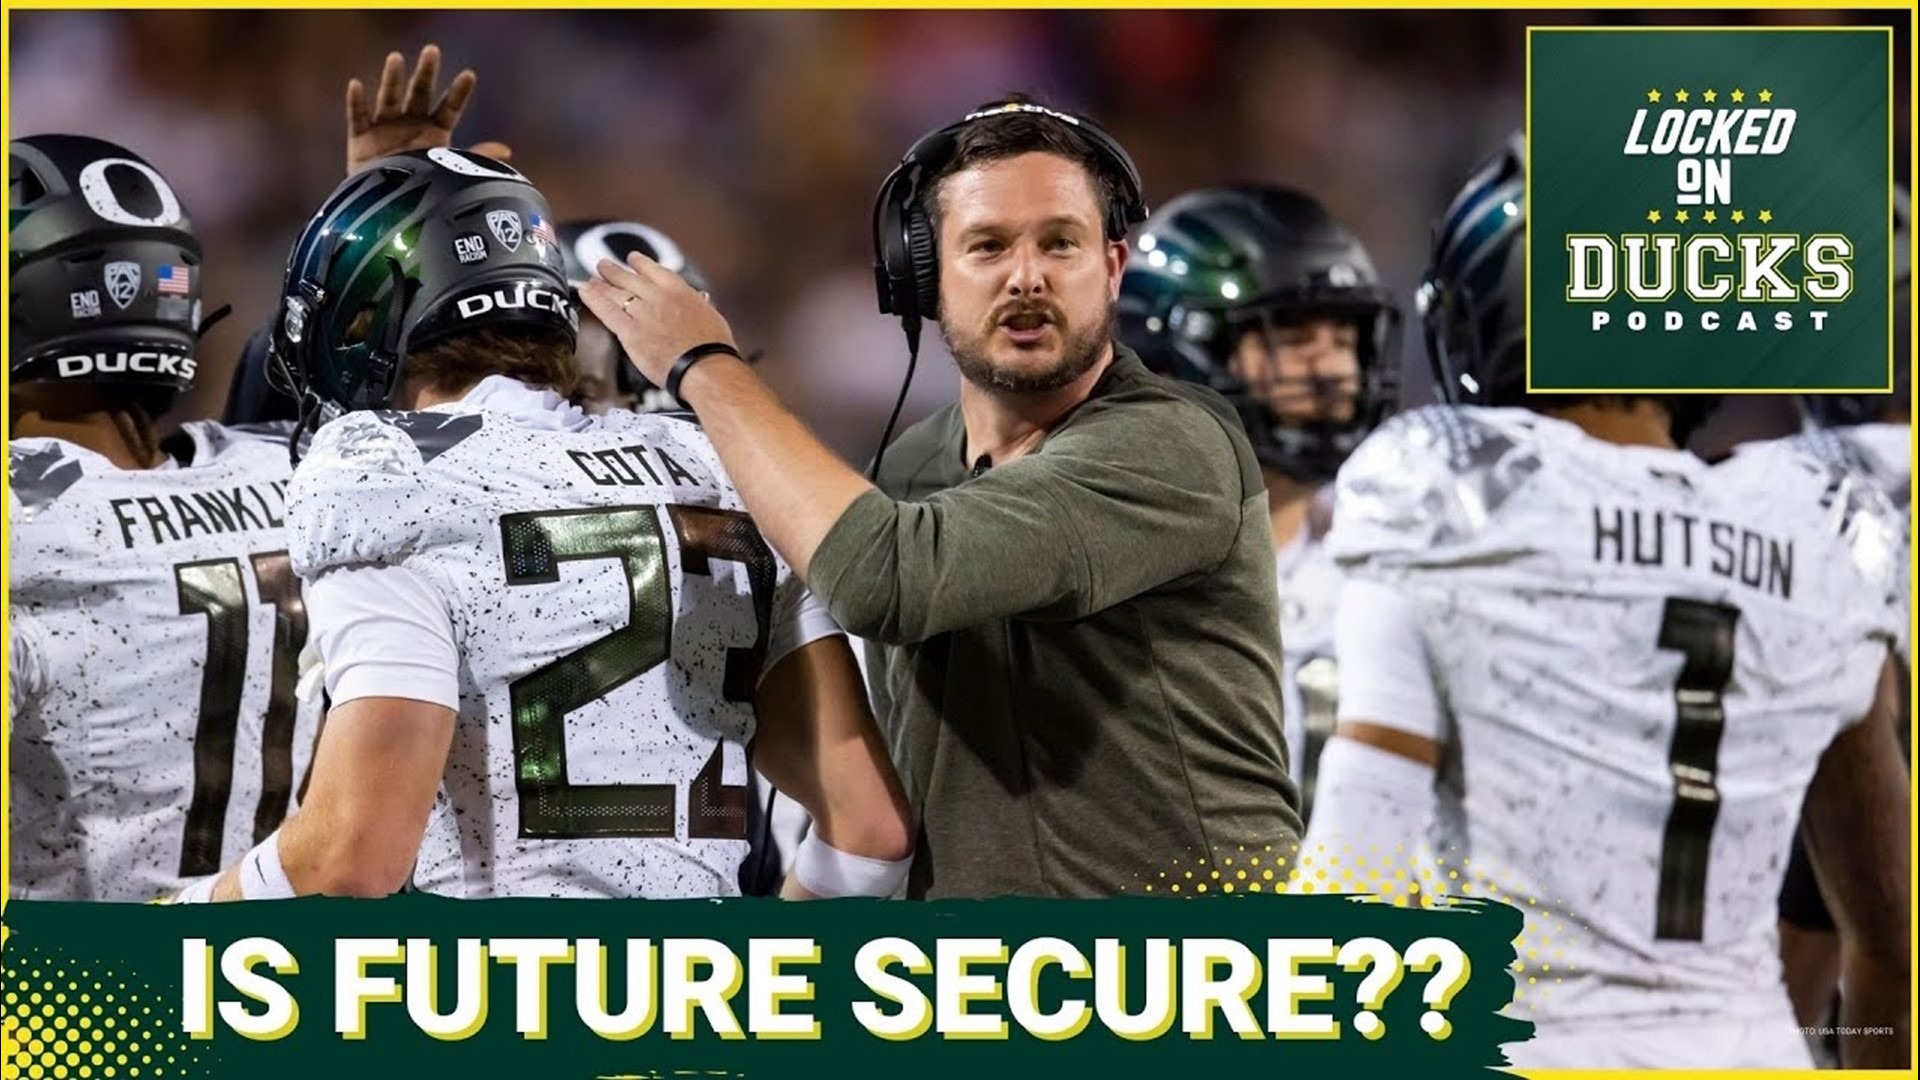 The Pac-12 media deal hasn't been announced, but Oregon's brand is unlikely to take a hit on the recruiting front.